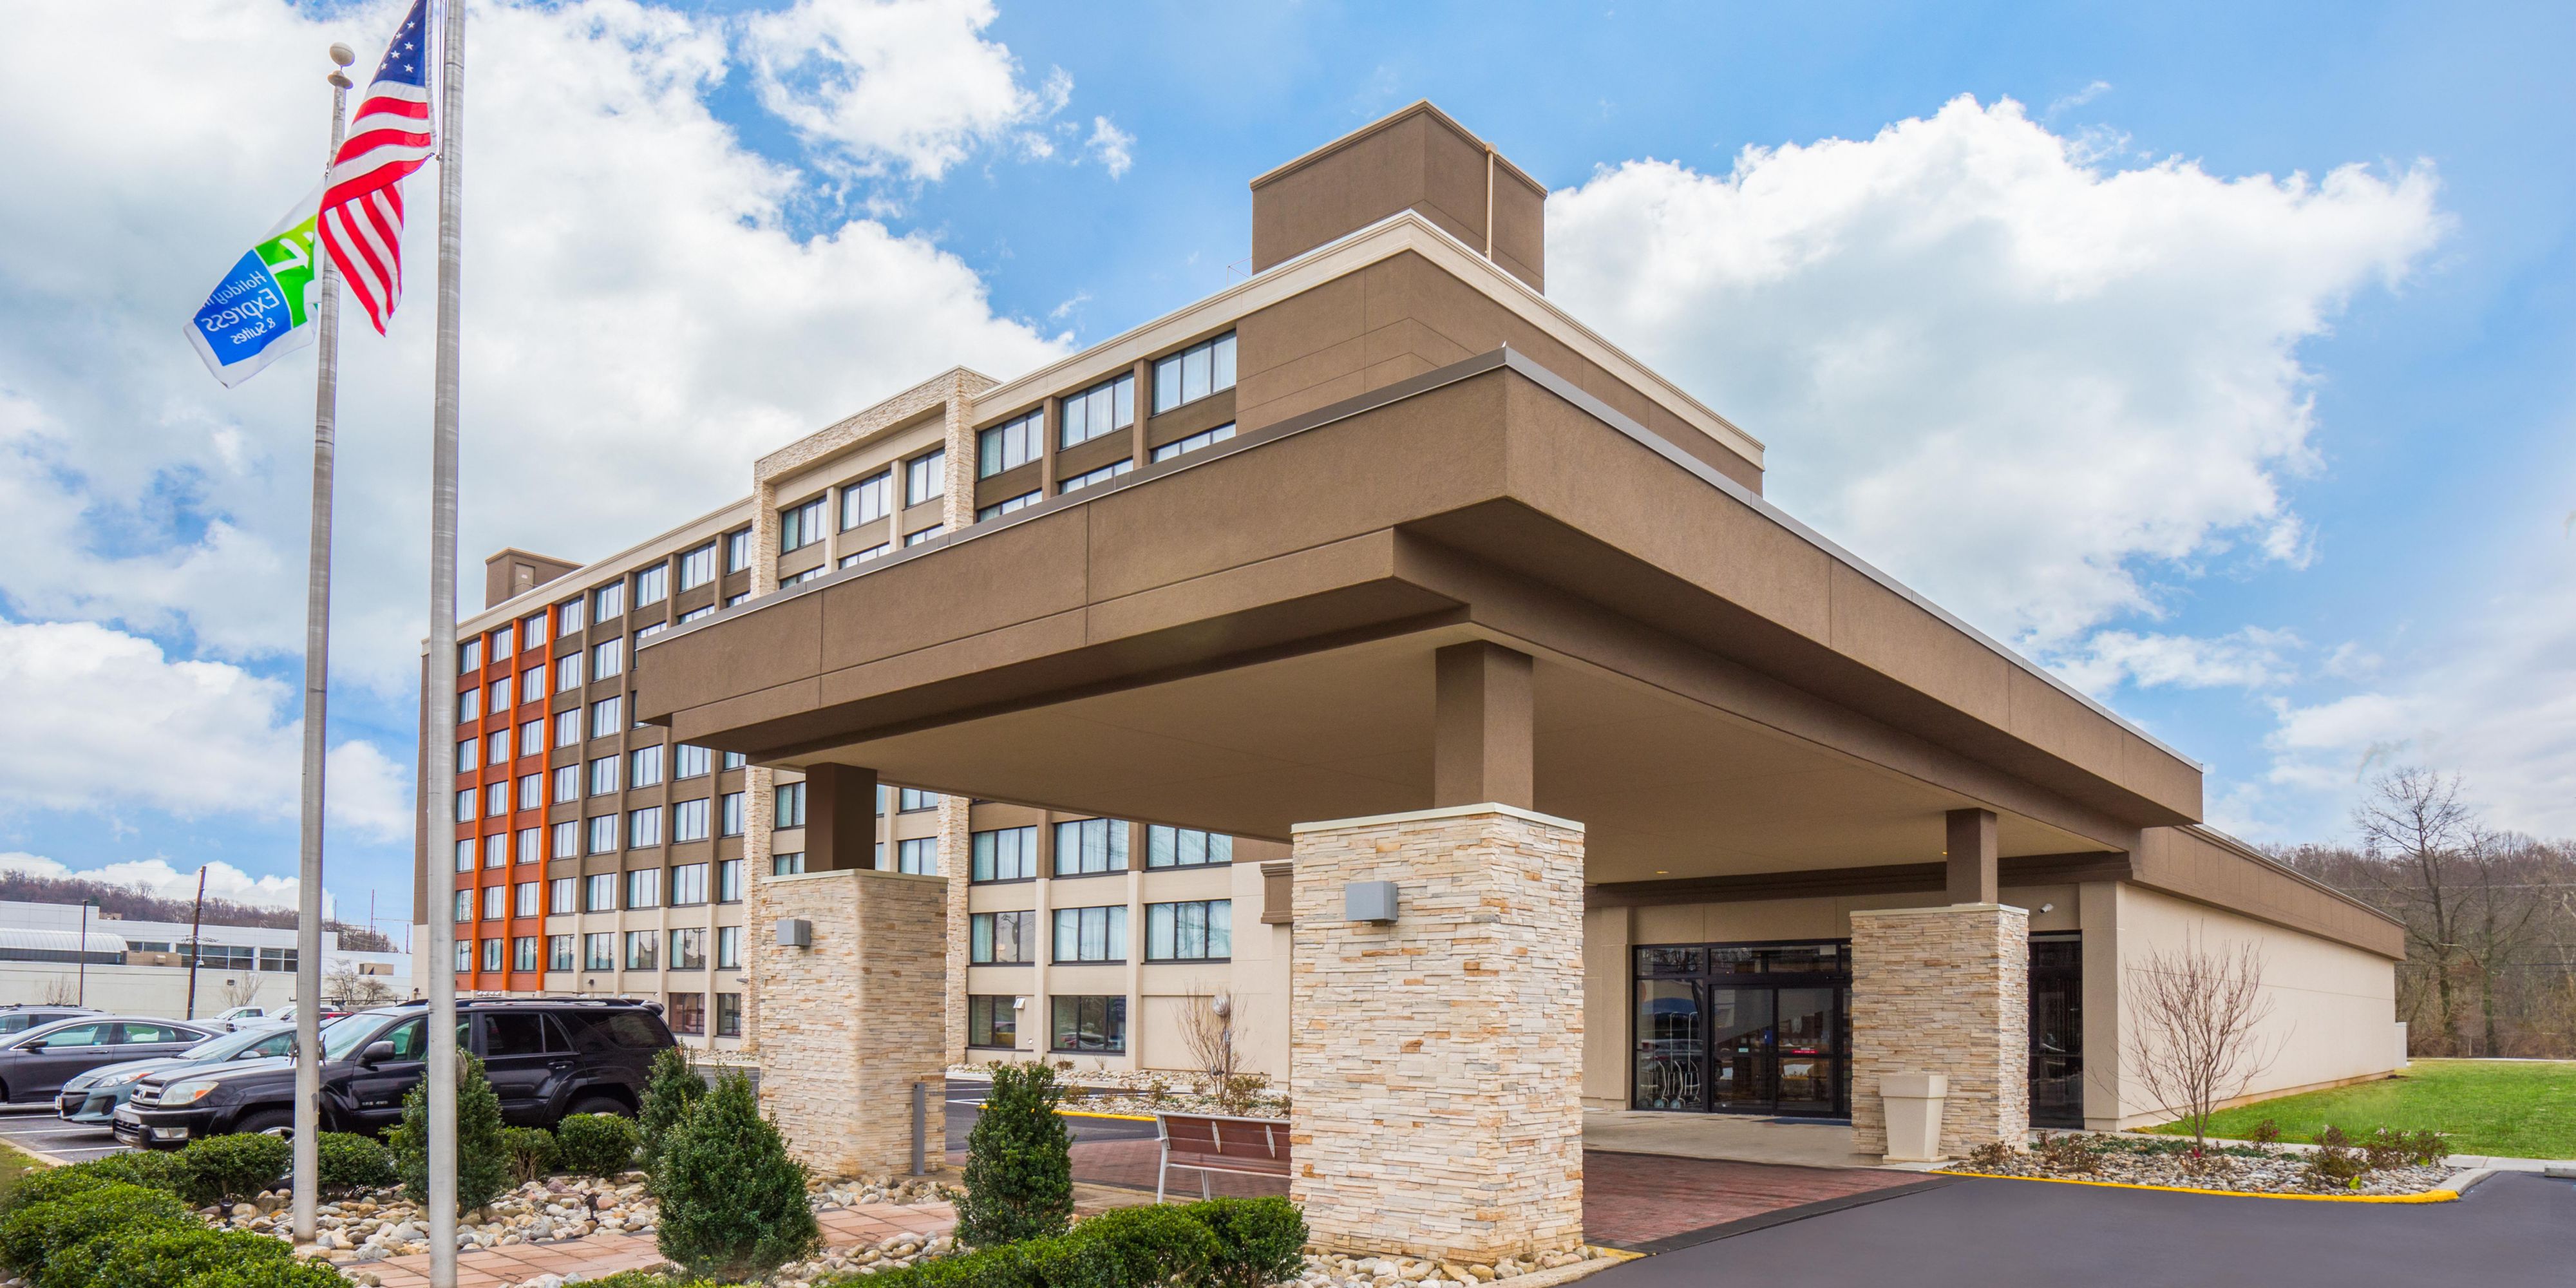 Our hotel in Ft. Washington has everything you need for a great stay. From spacious and modern rooms and suites, to an outdoor pool and complimentary fitness center, our guests are guaranteed a relaxing stay at Holiday Inn Express & Suites. Click the link to view our virtual tour!